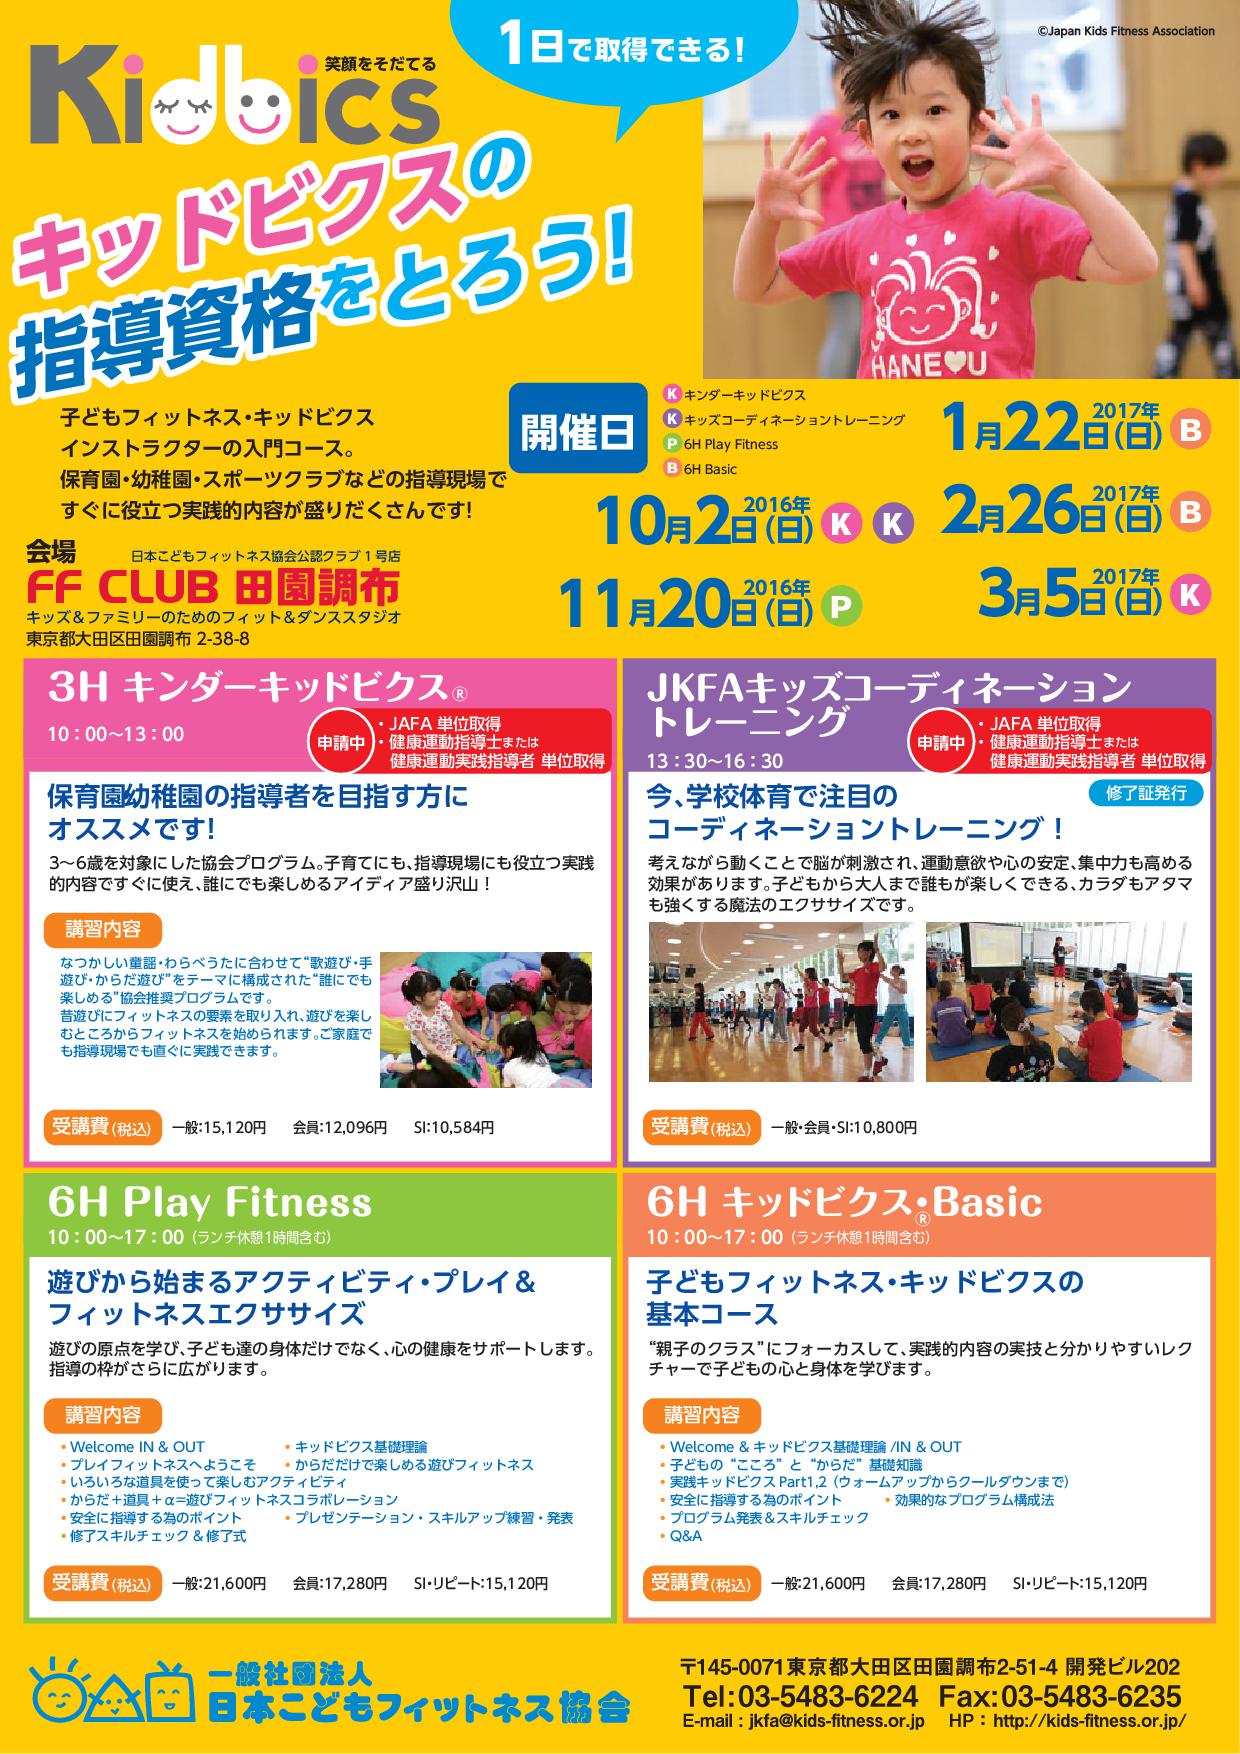 http://kids-fitness.or.jp/news/images/ff_3h_6h_A4-2.jpg